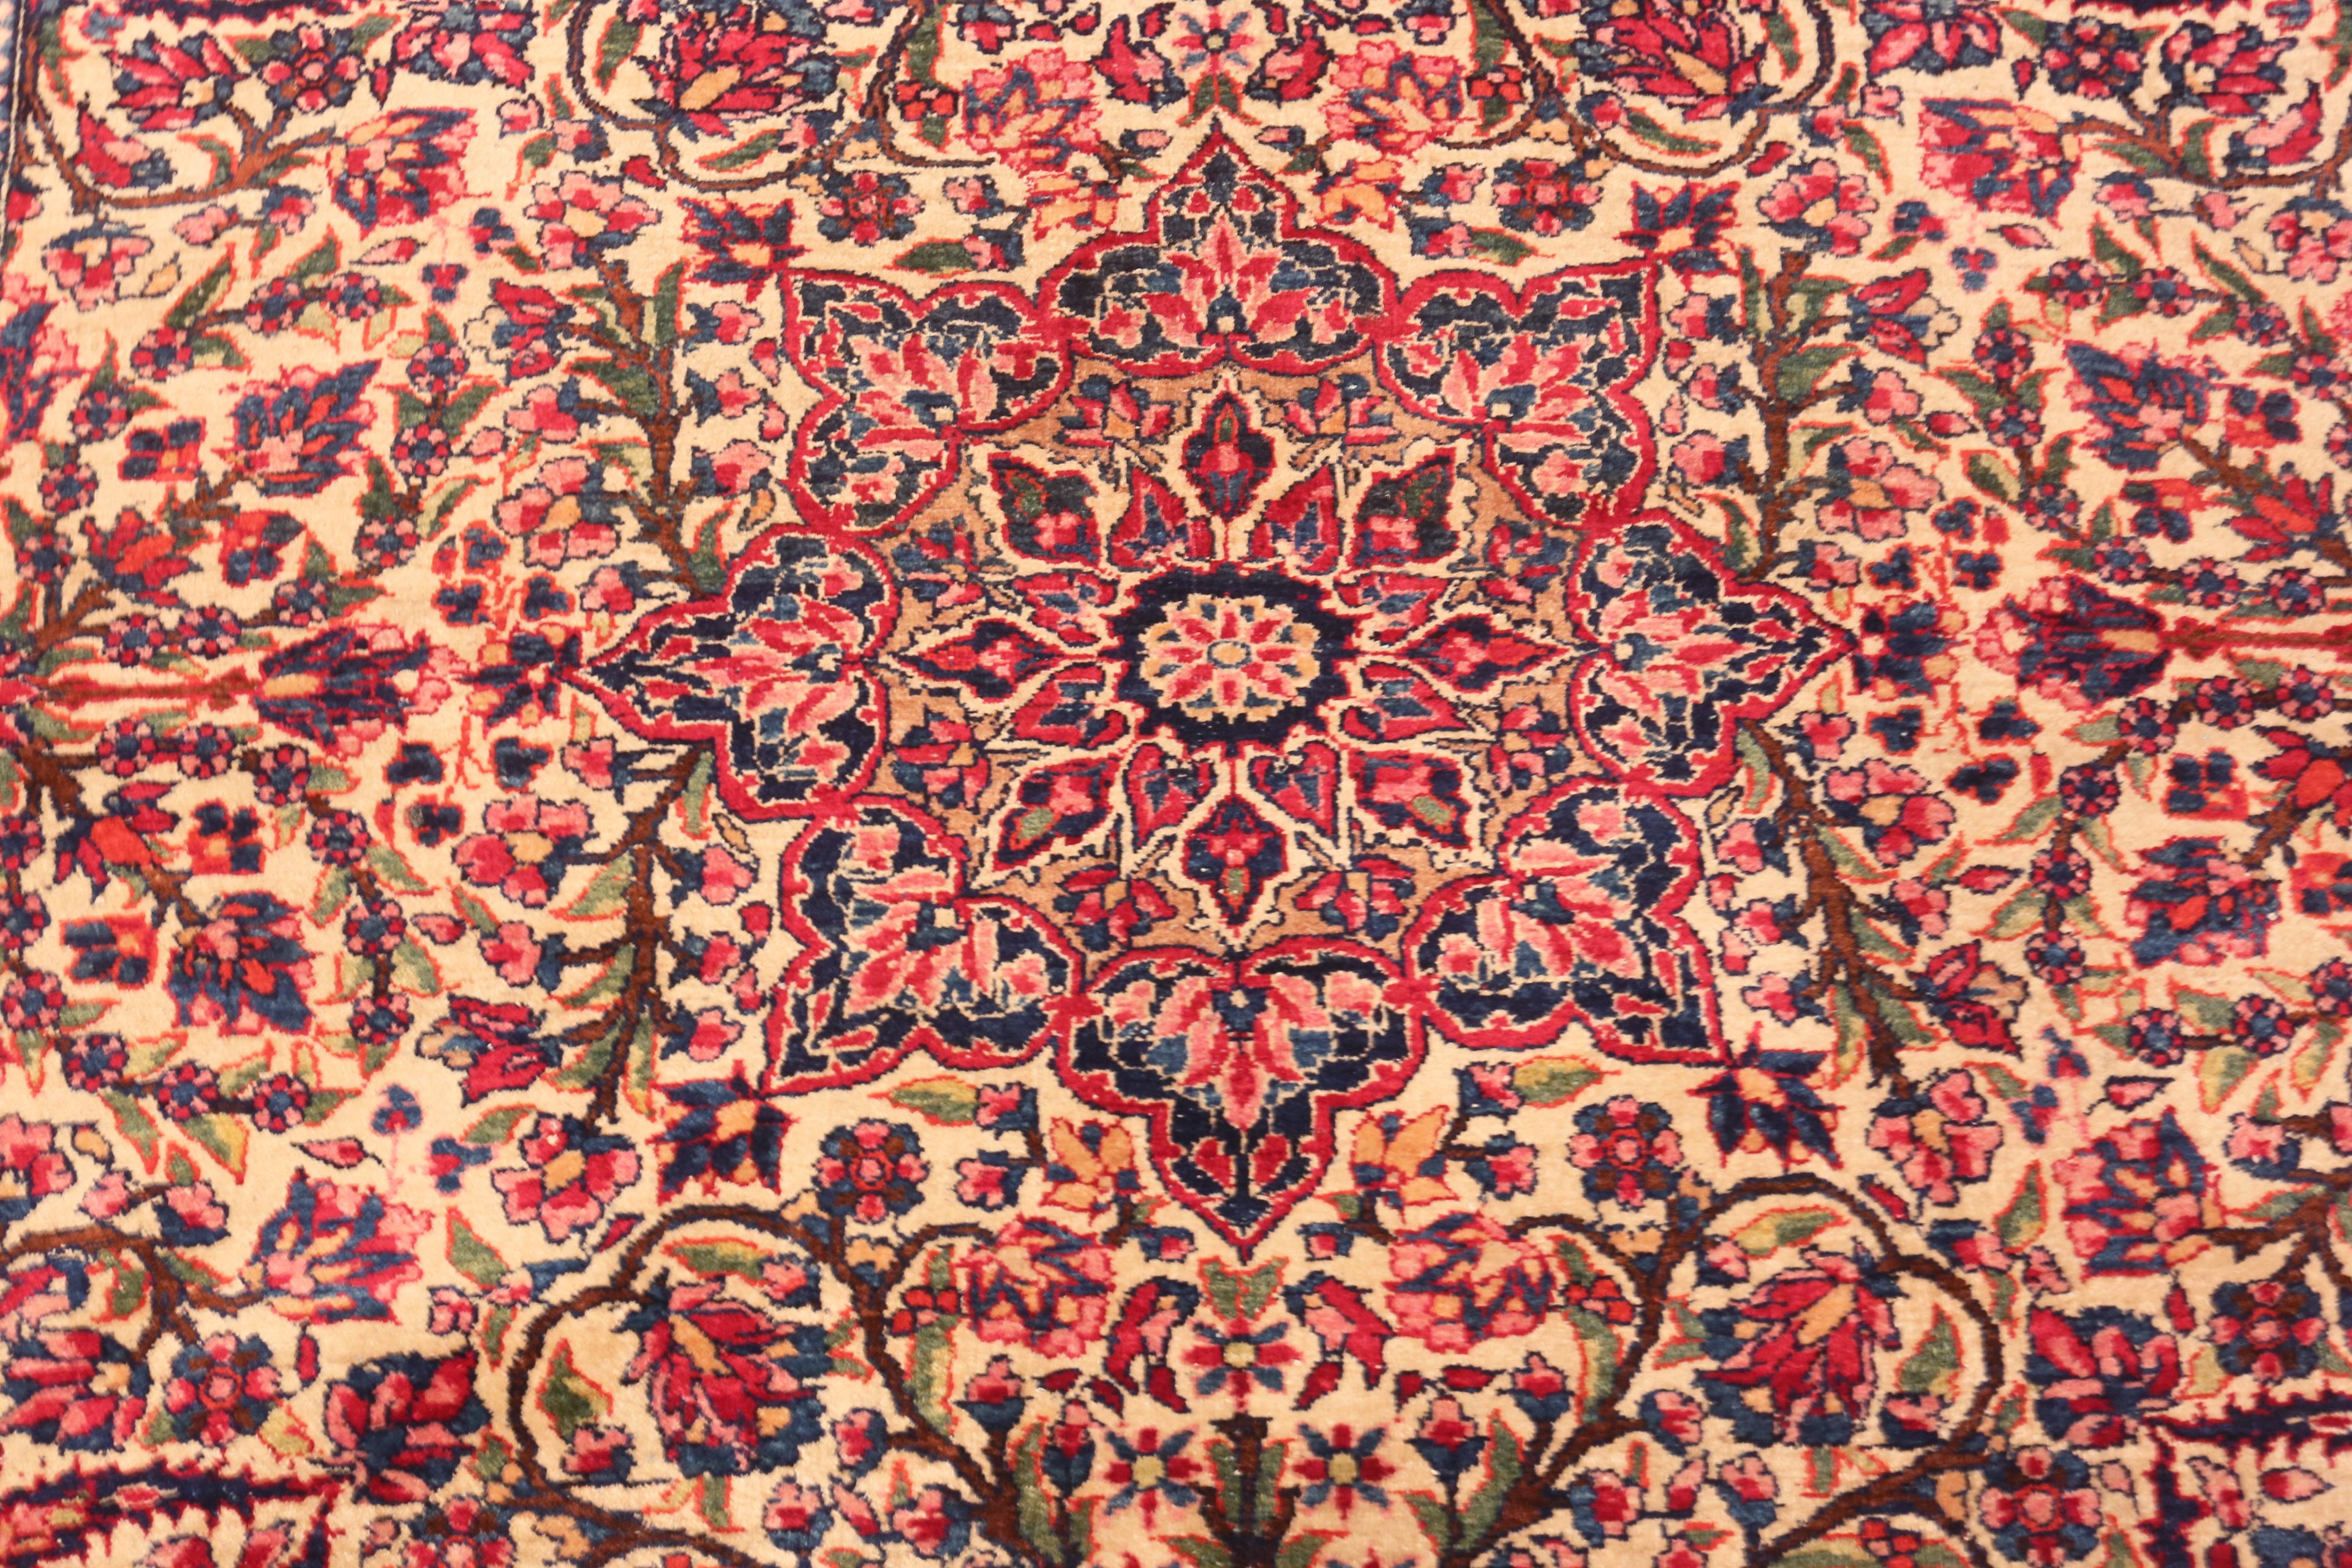 Marvelous Antique Persian Isfahan Rug, Country Of Origin / Rug Type: Persian Rug, Circa date: 1920. Size: 4 ft 5 in x 7 ft (1.34m x 2.13 m).